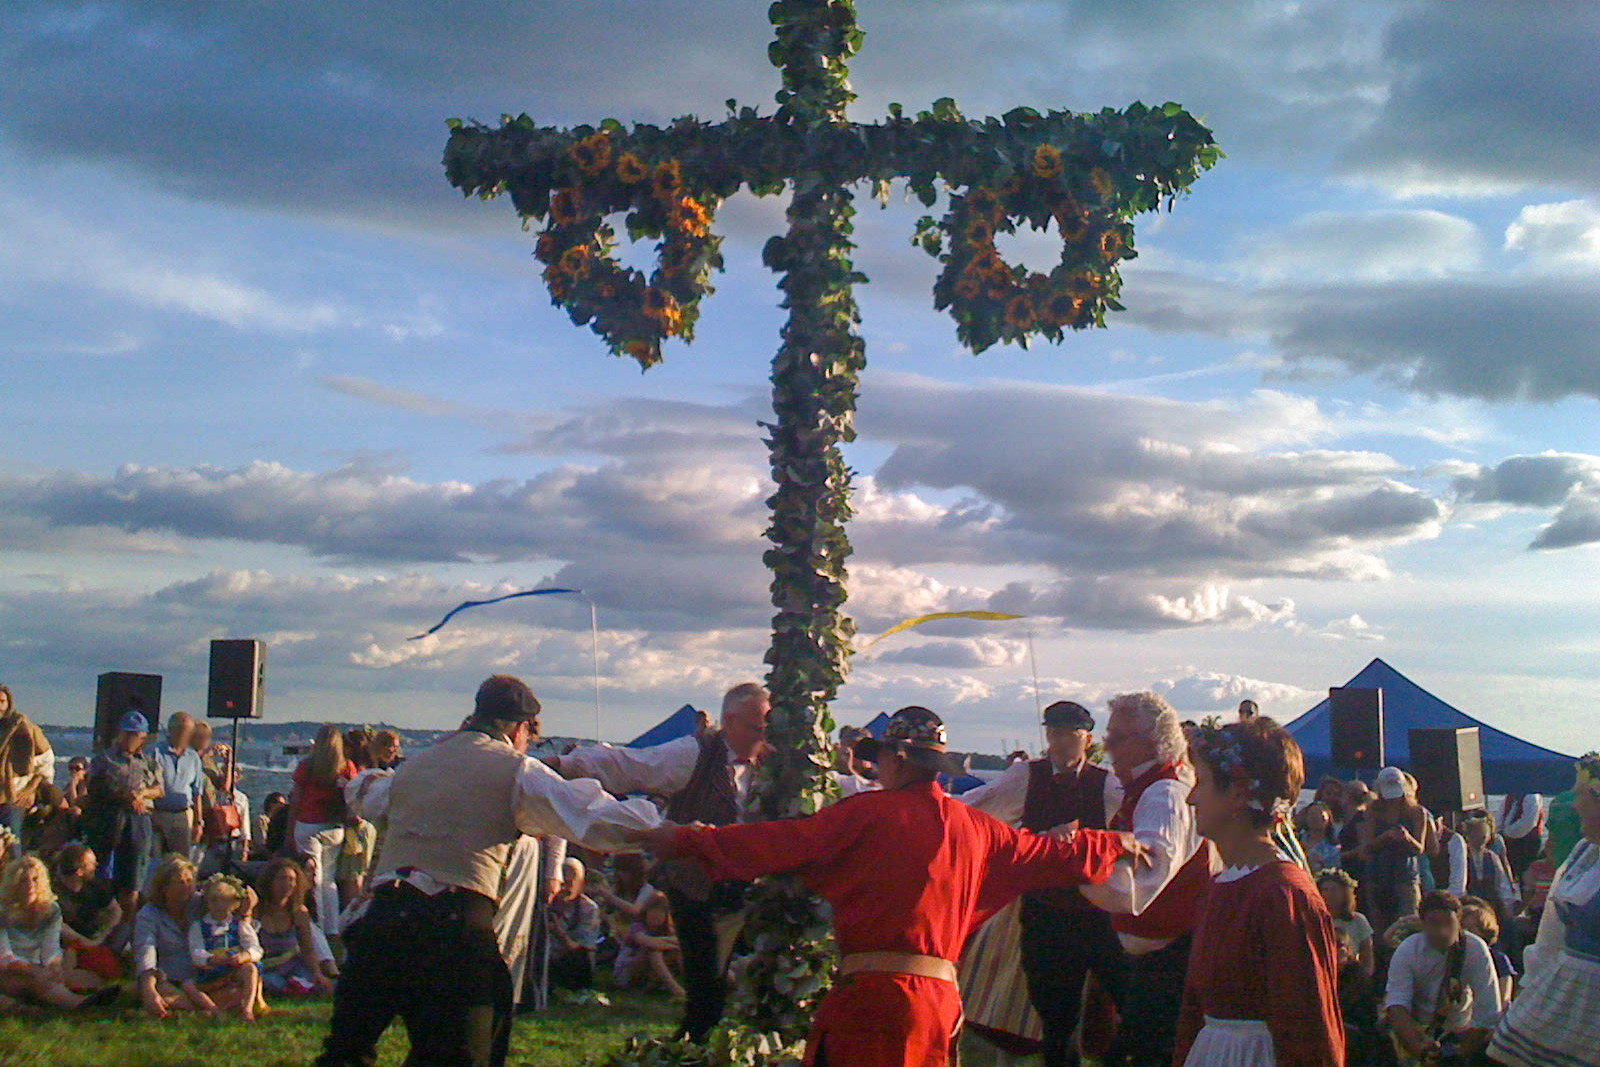 People dancing around a maypole at the Swedish Midsummer festival in NYC